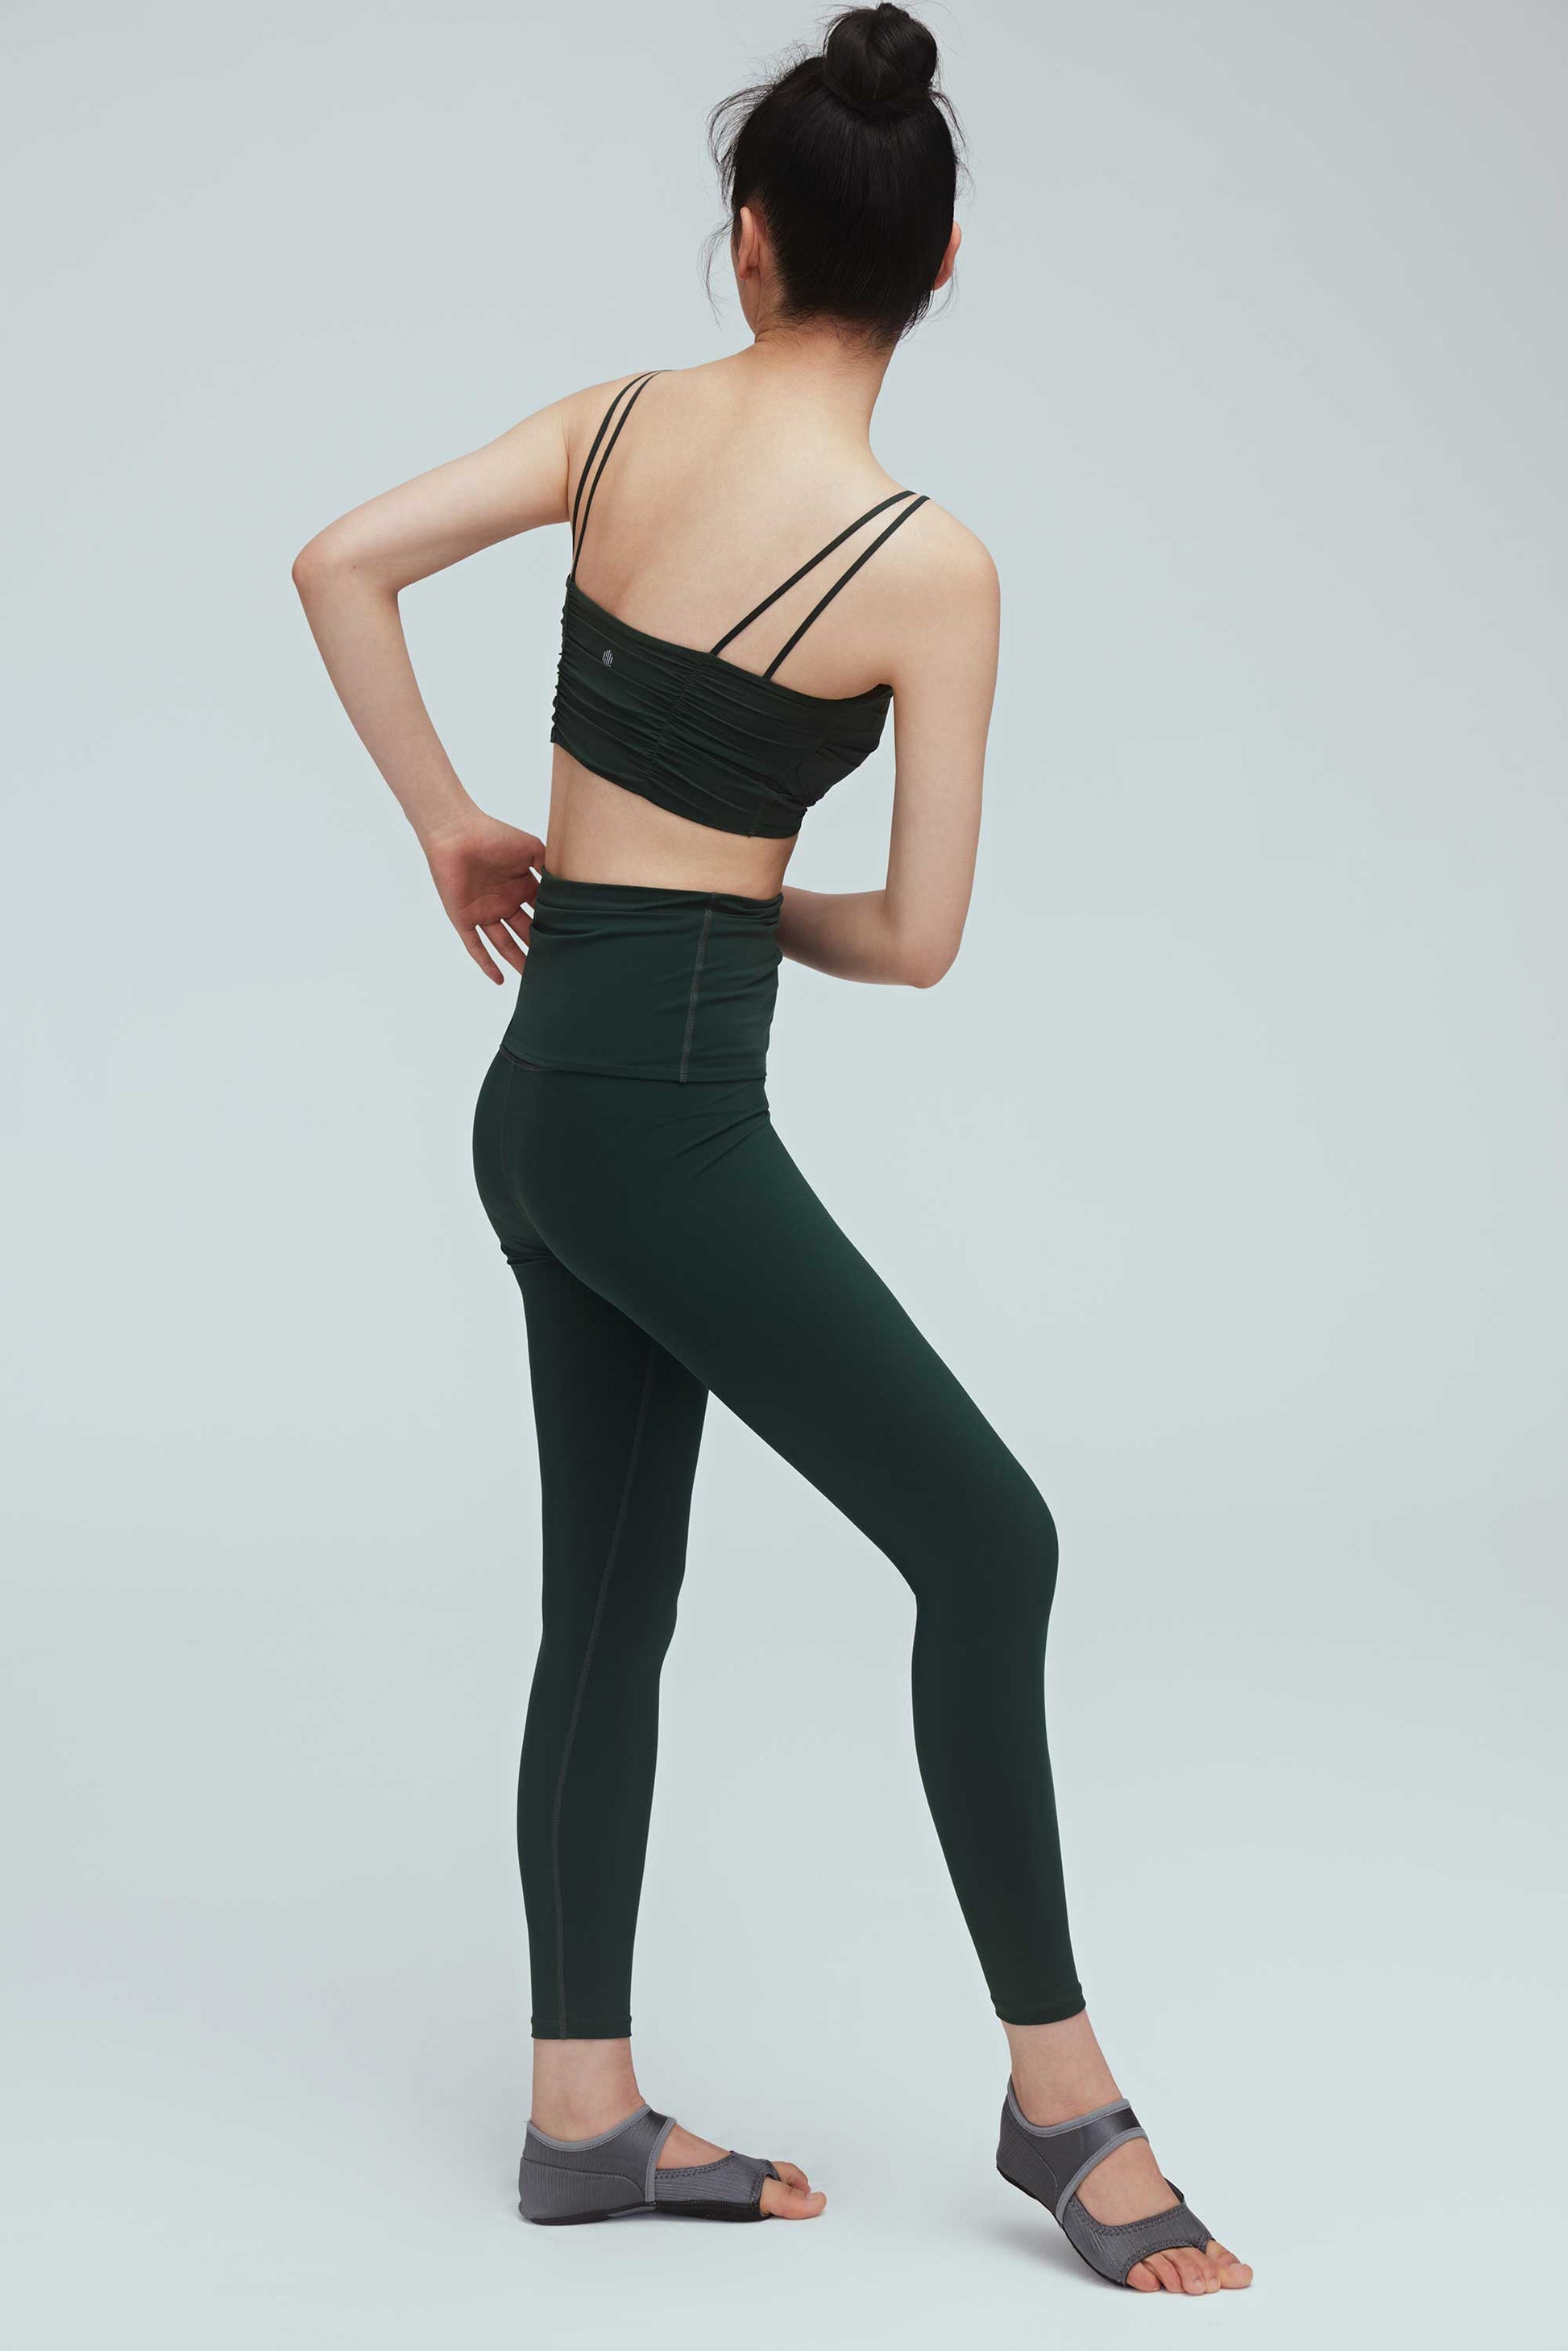 back of a woman wearing a green drawstring leggings and green sports bra